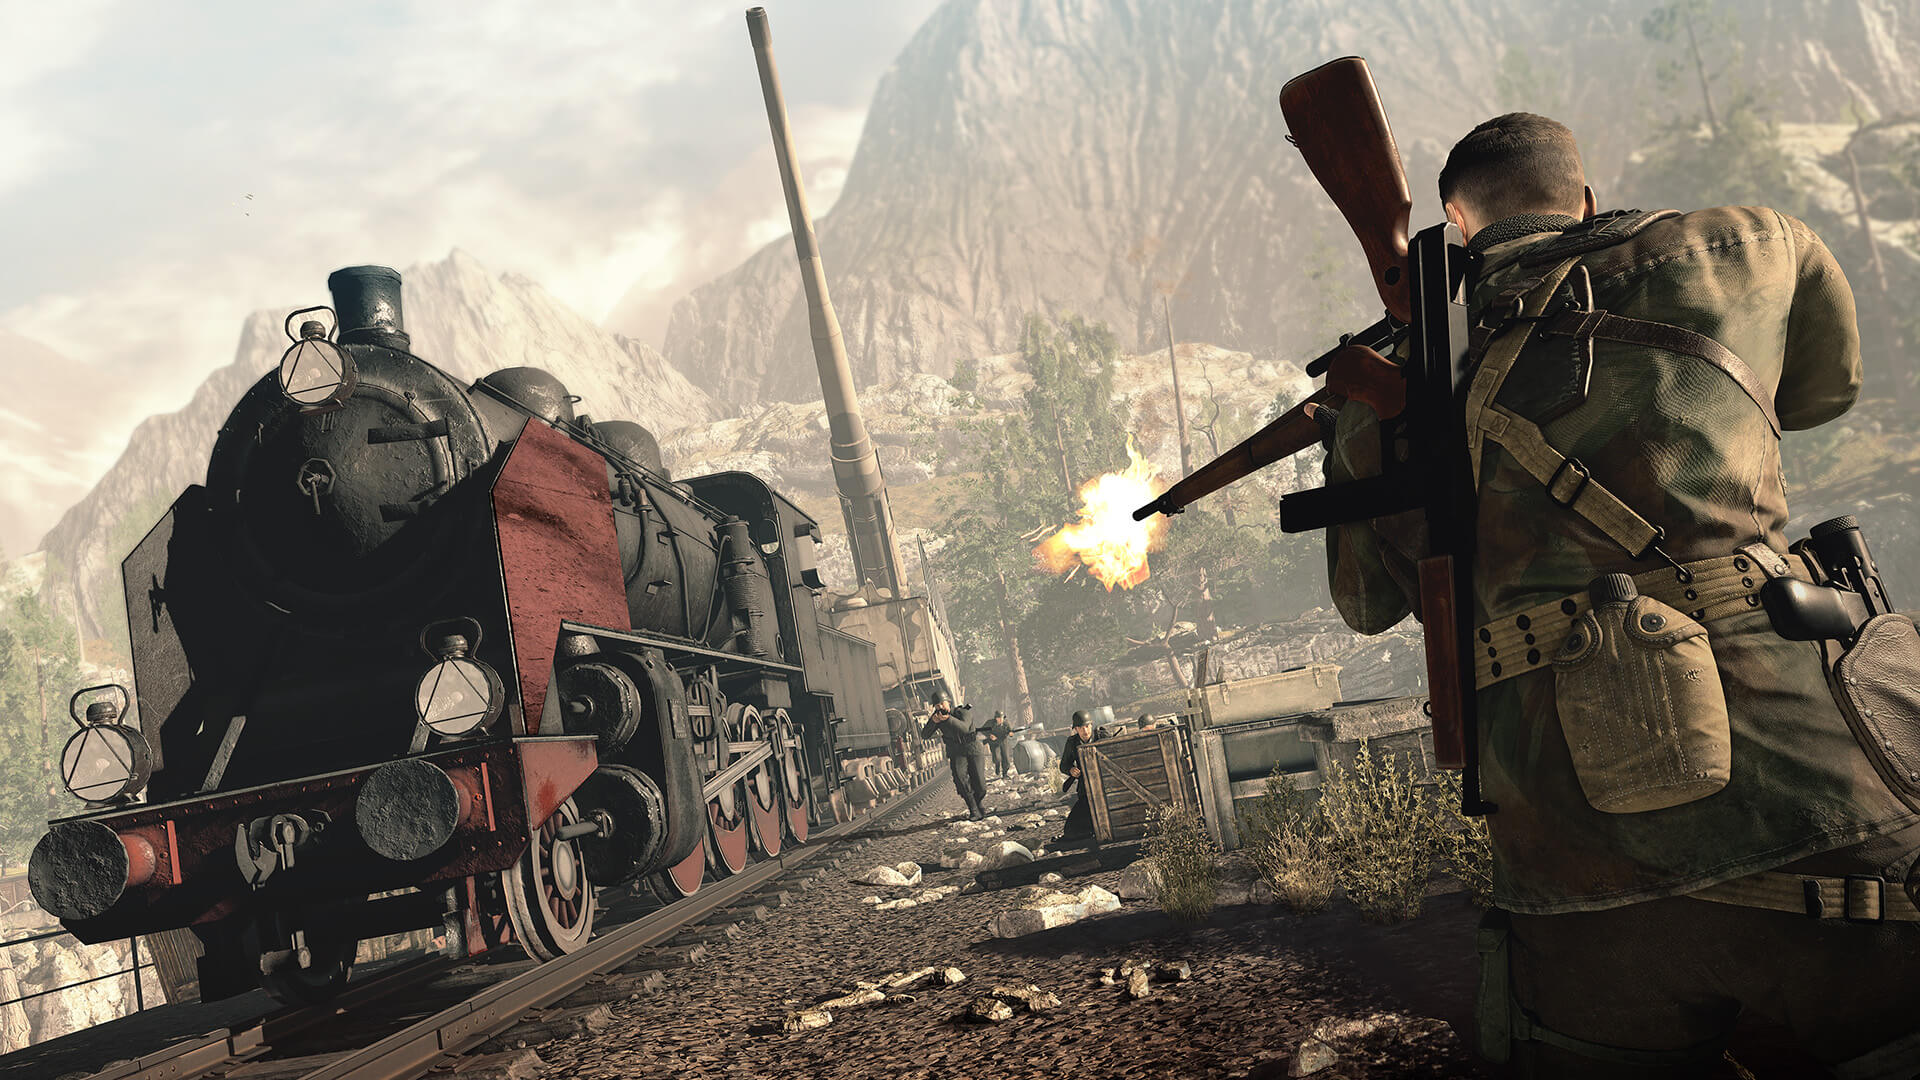 This New Game Is The Fourth Main Game In The Super Hit Tactical Shooter Series Of Sniper Elite. This Game Comes With New Story, New Features And New Environments Which Are Not Seen In The Previous Versions. This New Game Begins With The Beautiful Landscapes Of Italy During The Year 1943. The Player Plays The Role Of Karl Fairburne, Who Is A Covert And Perfectly Skilled Sniper. The Player Should Use His Skills In Shooting The Targets And He Should Also Use The Skills Of Stealth In Escaping From The Enemies.